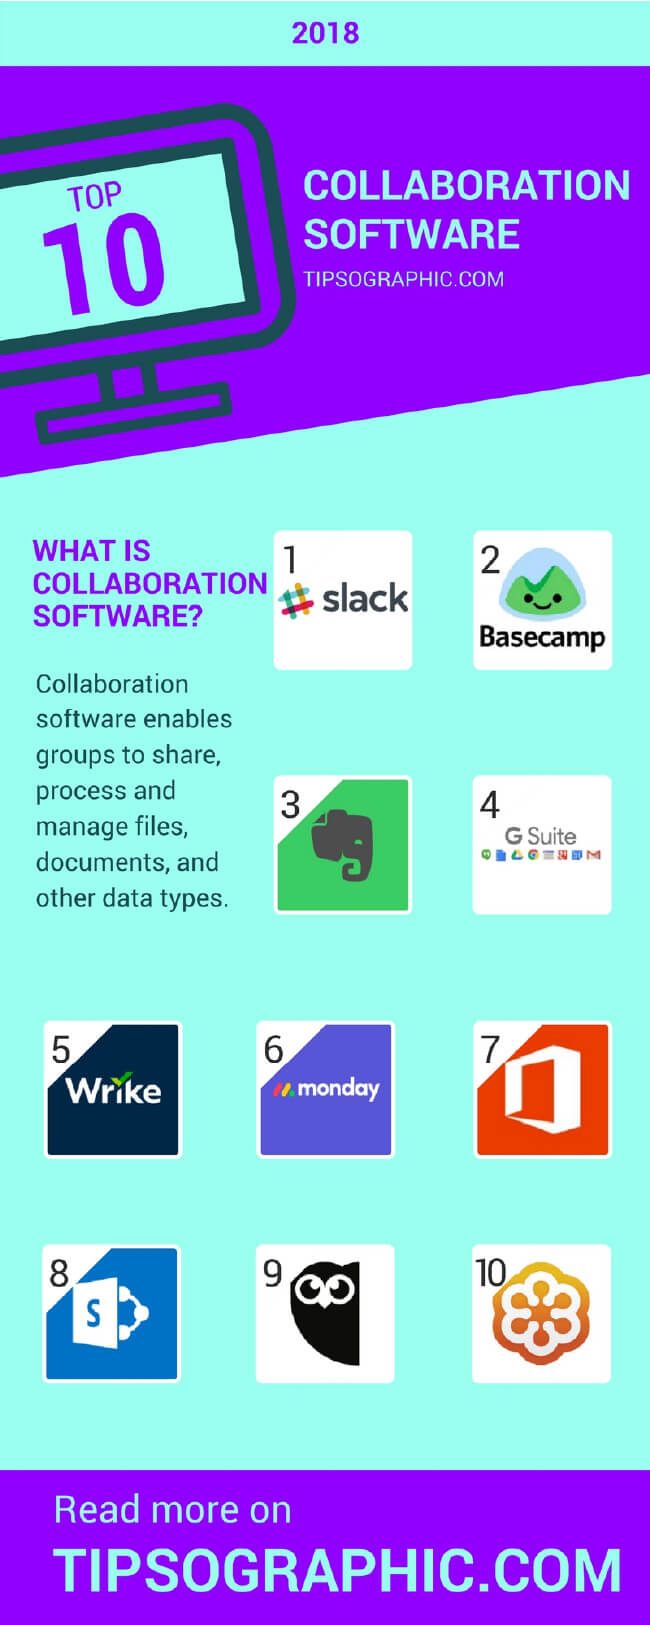 Image titled collaboration software 2018 best systems